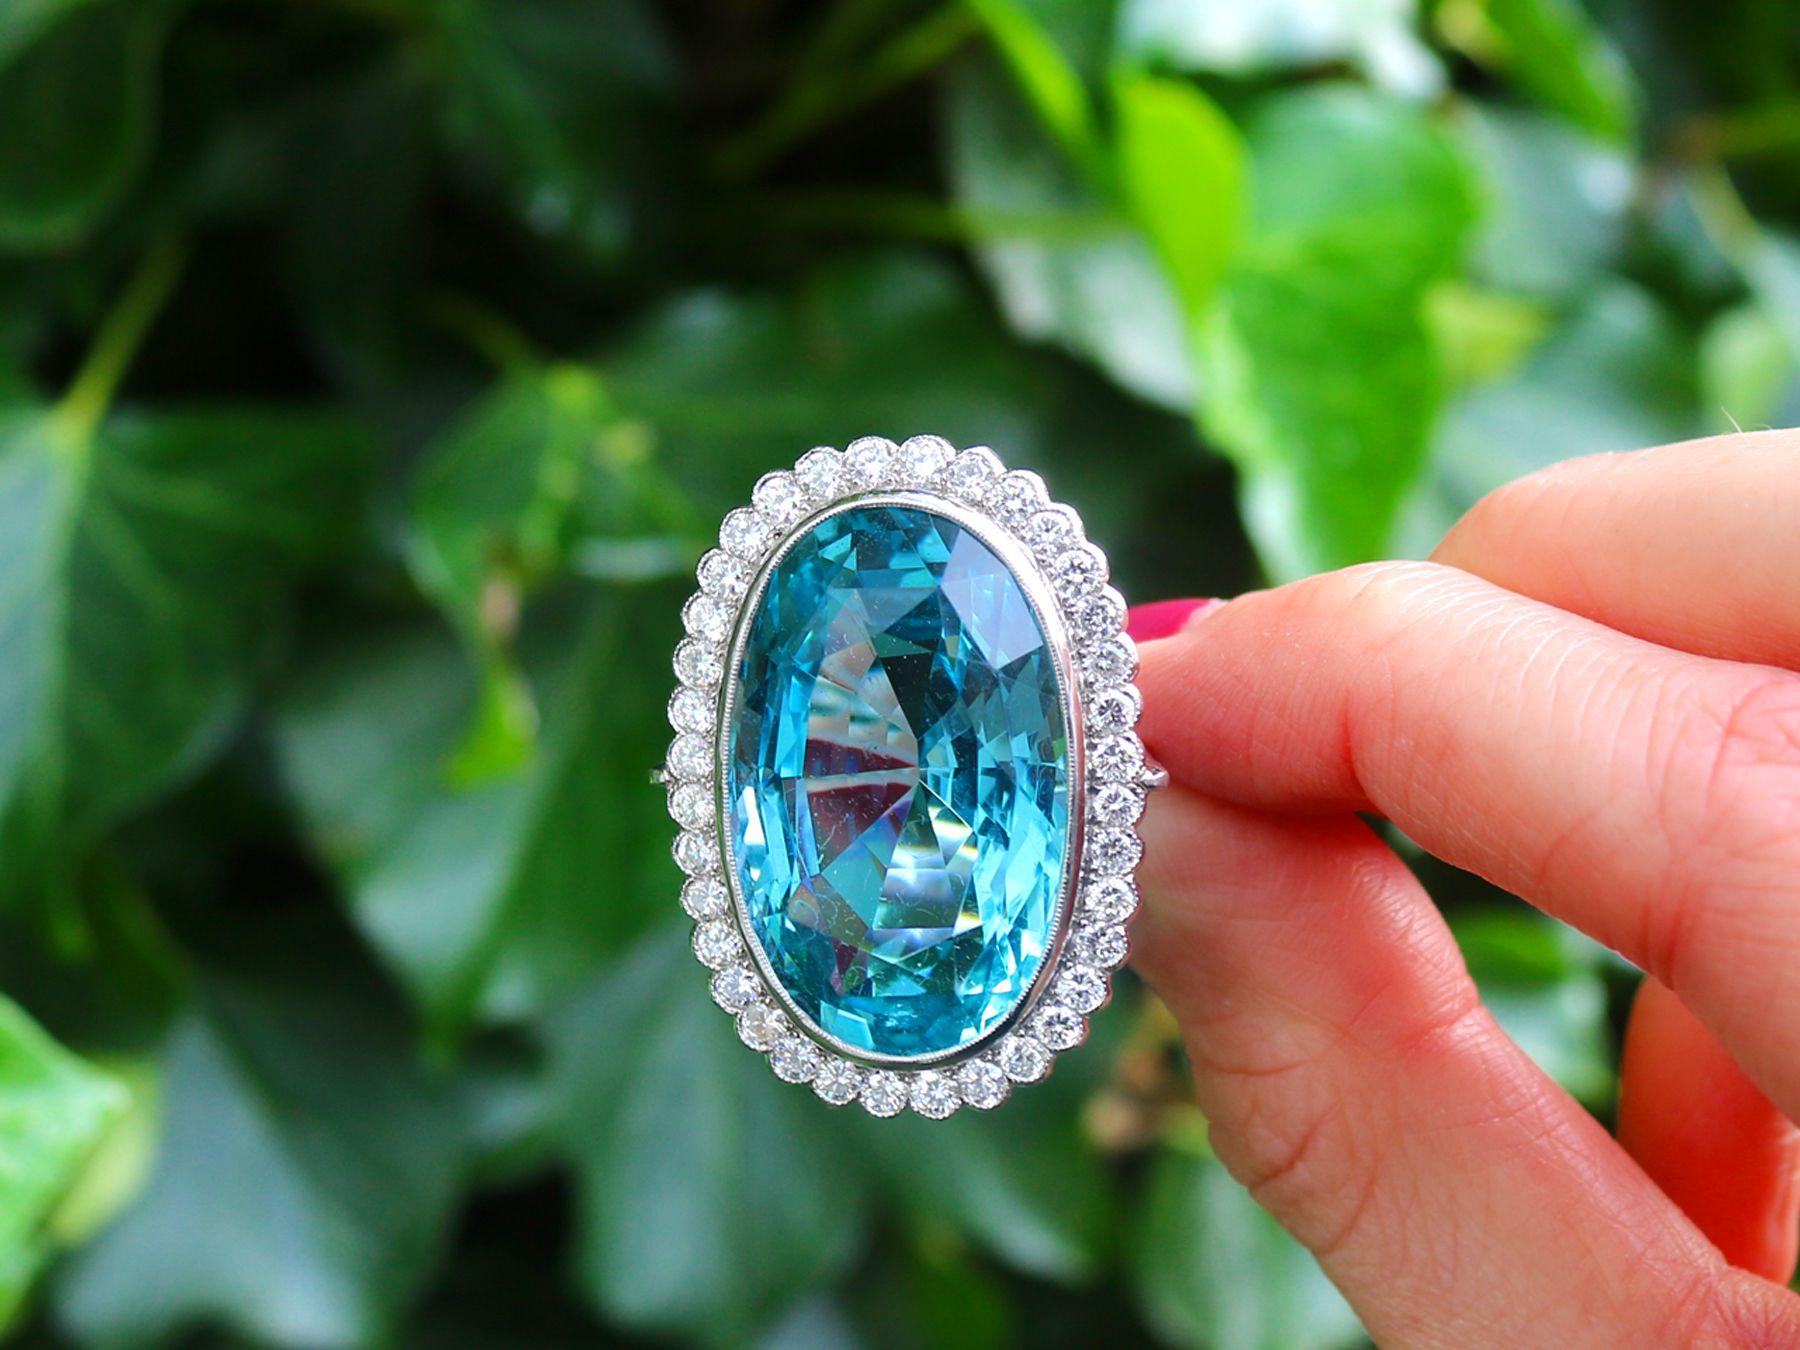 A stunning, fine, and impressive 40.72 carat aquamarine and 1.82 carat diamond platinum dress ring; part of our diverse collection of vintage jewelry and estate jewelry.

This stunning, fine and impressive vintage aquamarine ring has been crafted in